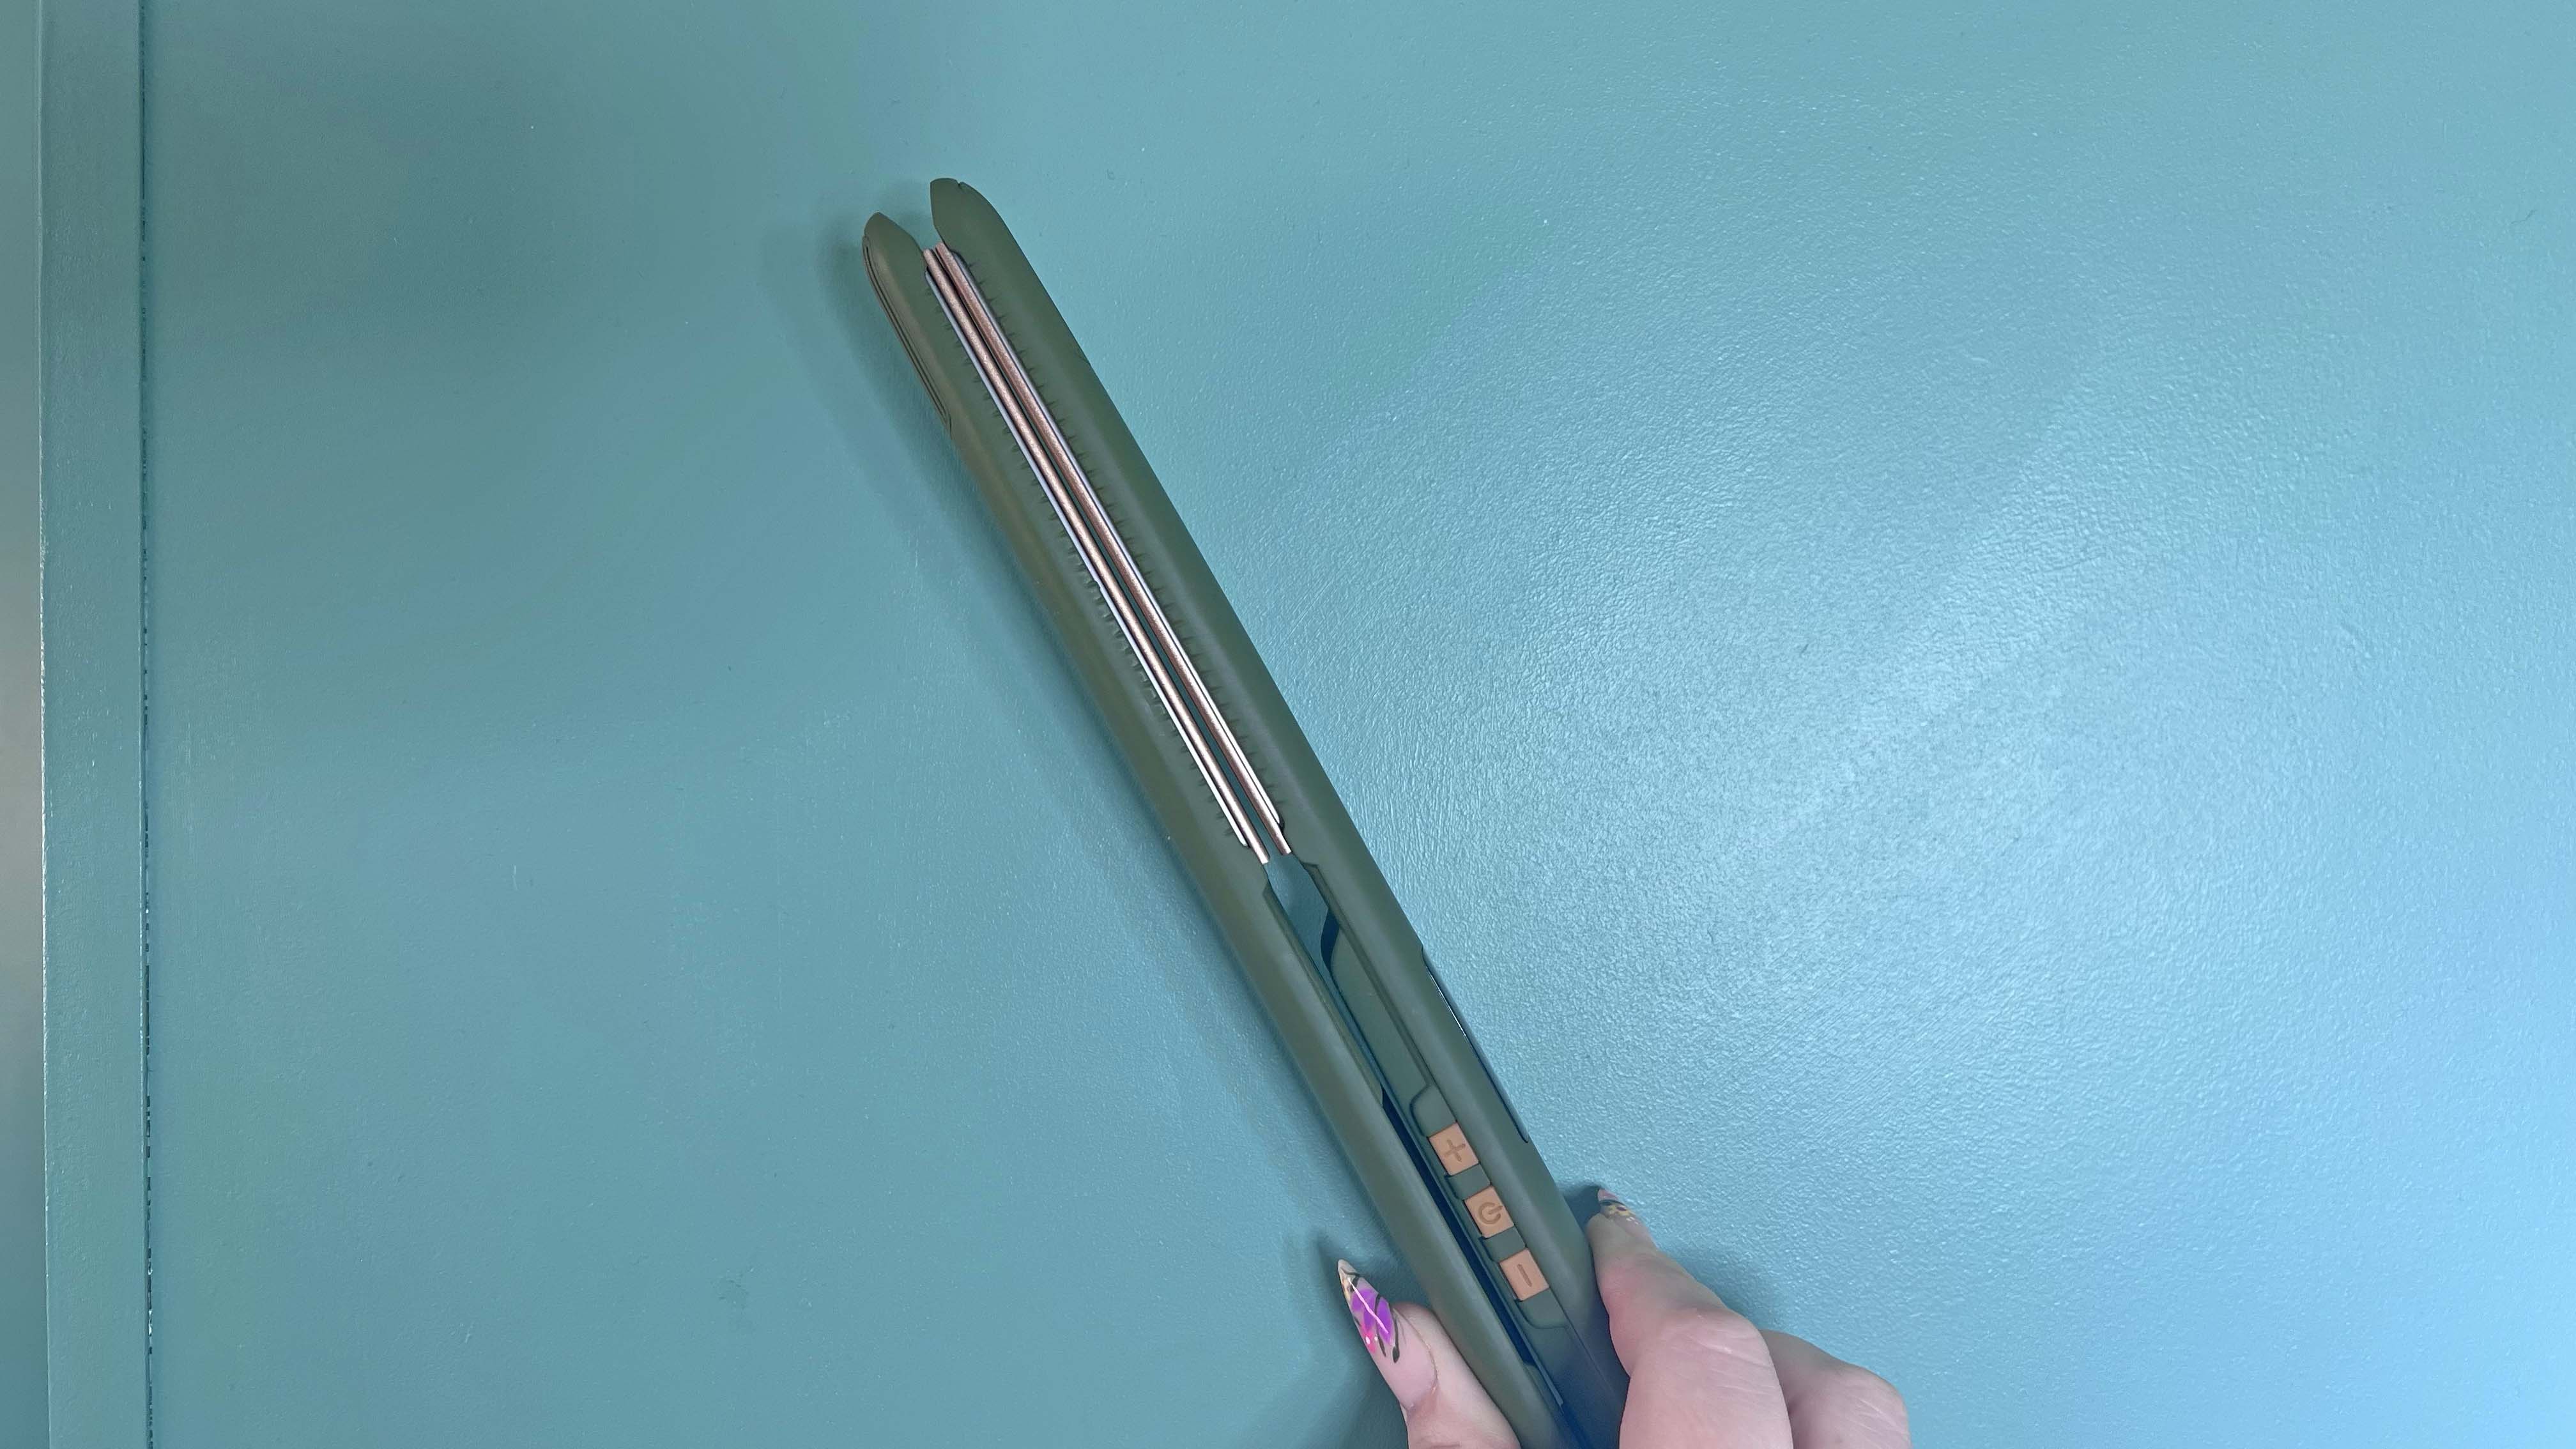 mdlondon STRAIT hair straighteners in reviewer's home